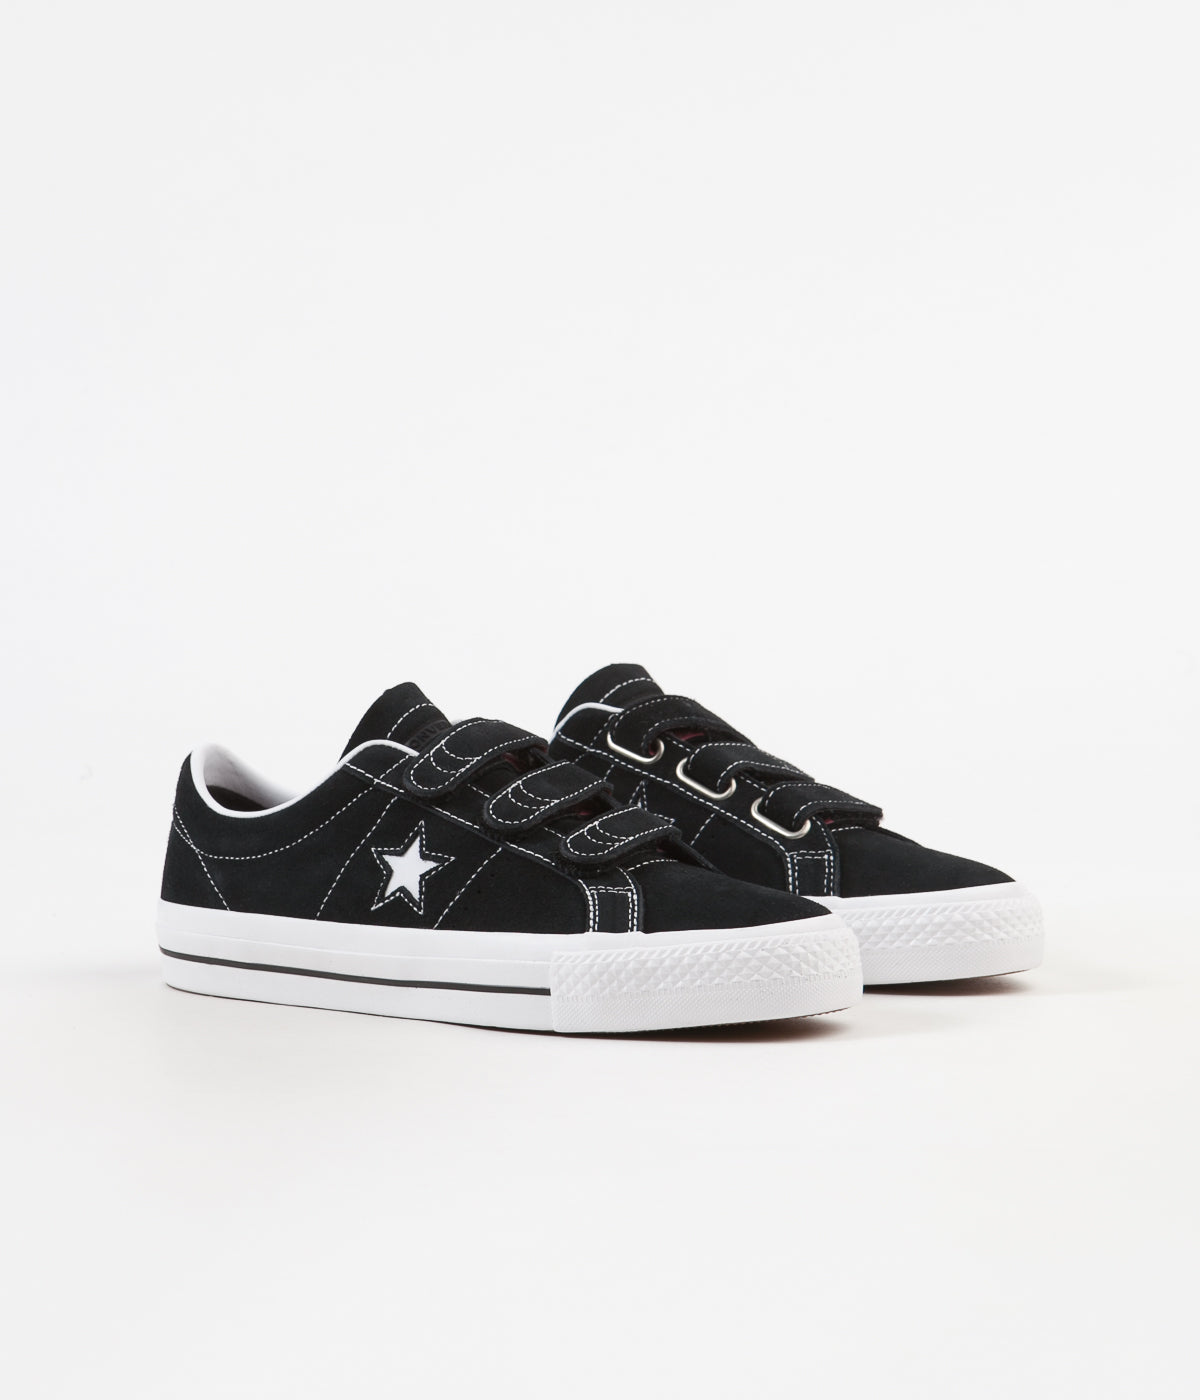 converse one star pro 3v suede low top